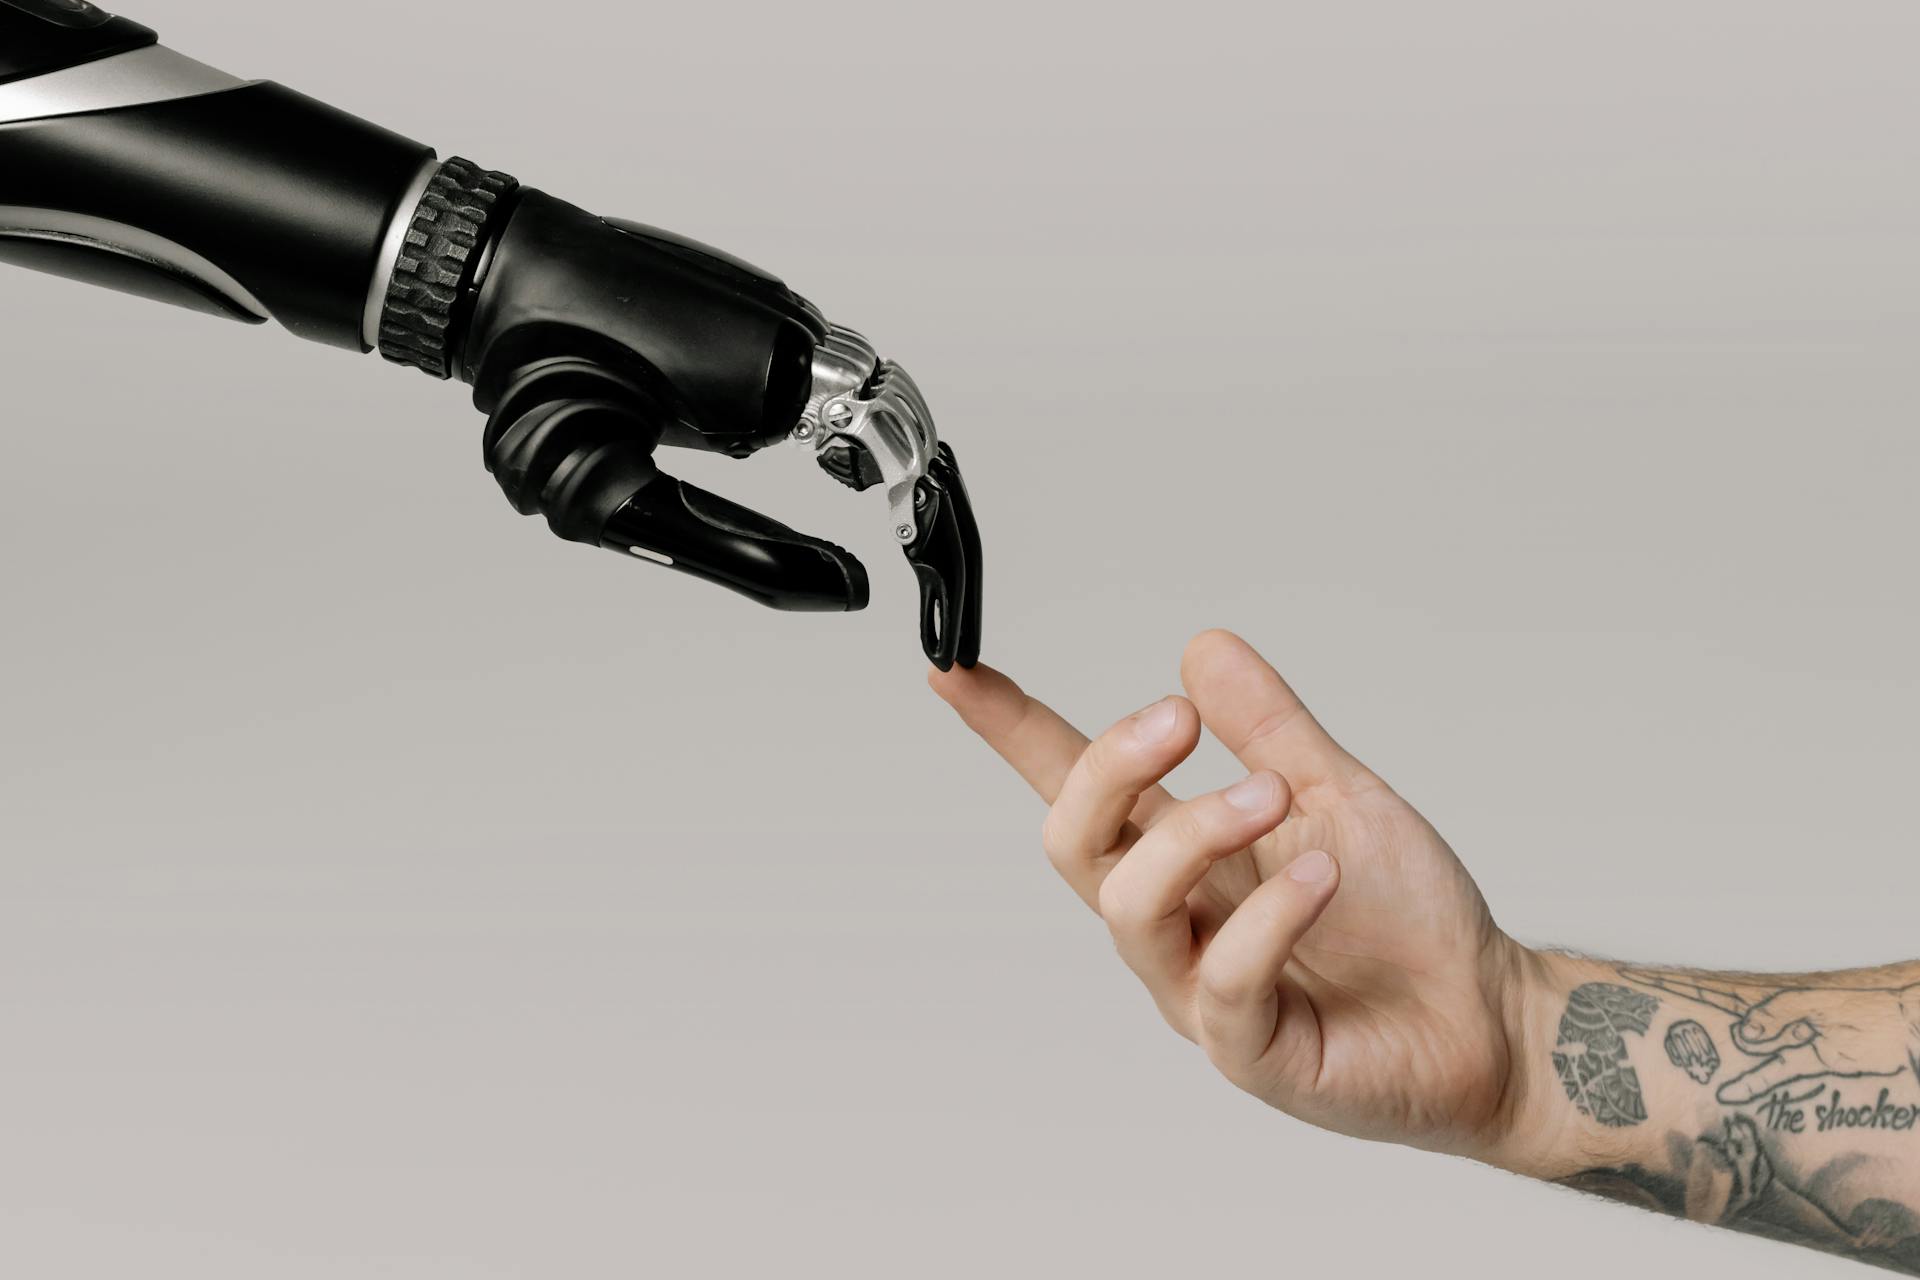 A Robot and human had touching each other